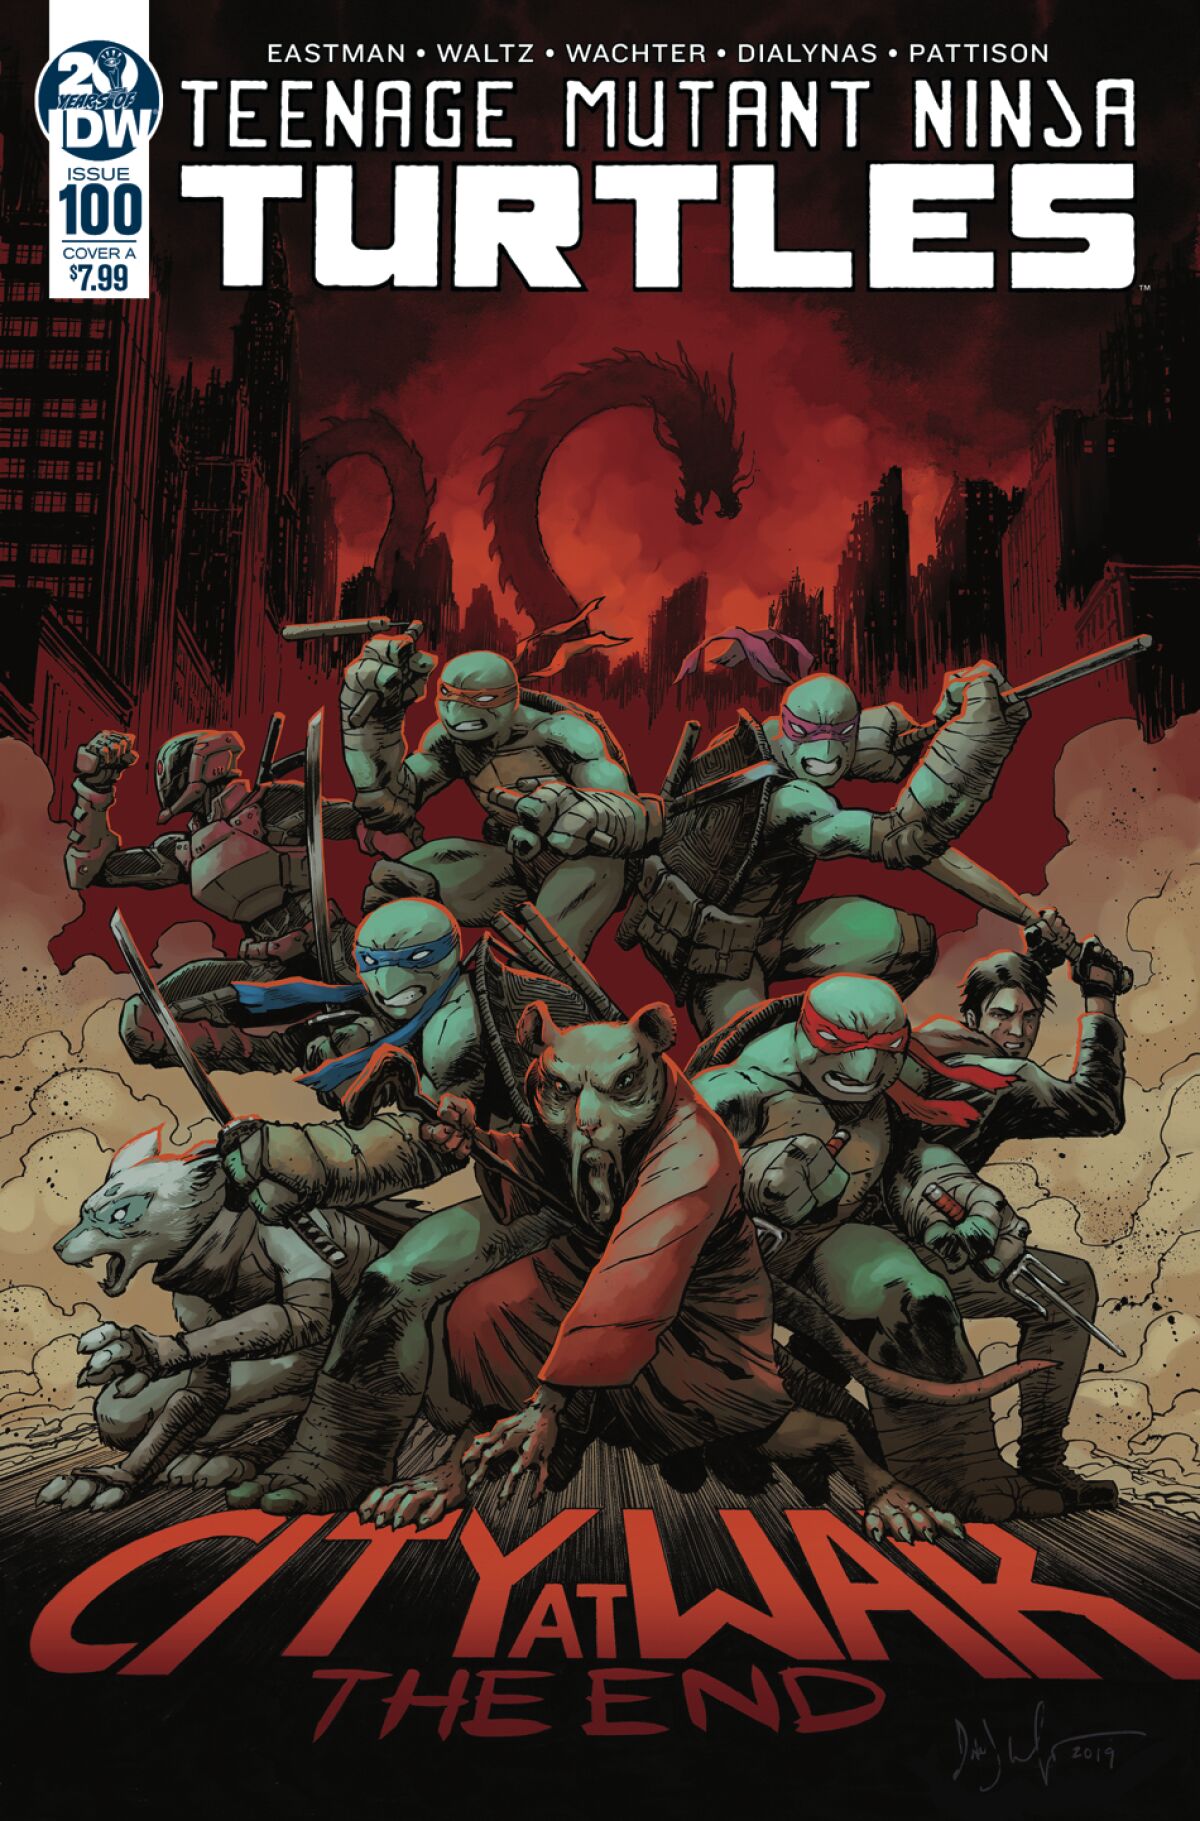 IDW Publishing is releasing the 100th edition of its "Teenage Mutant Ninja Turtles" series on Dec. 11, 2019.